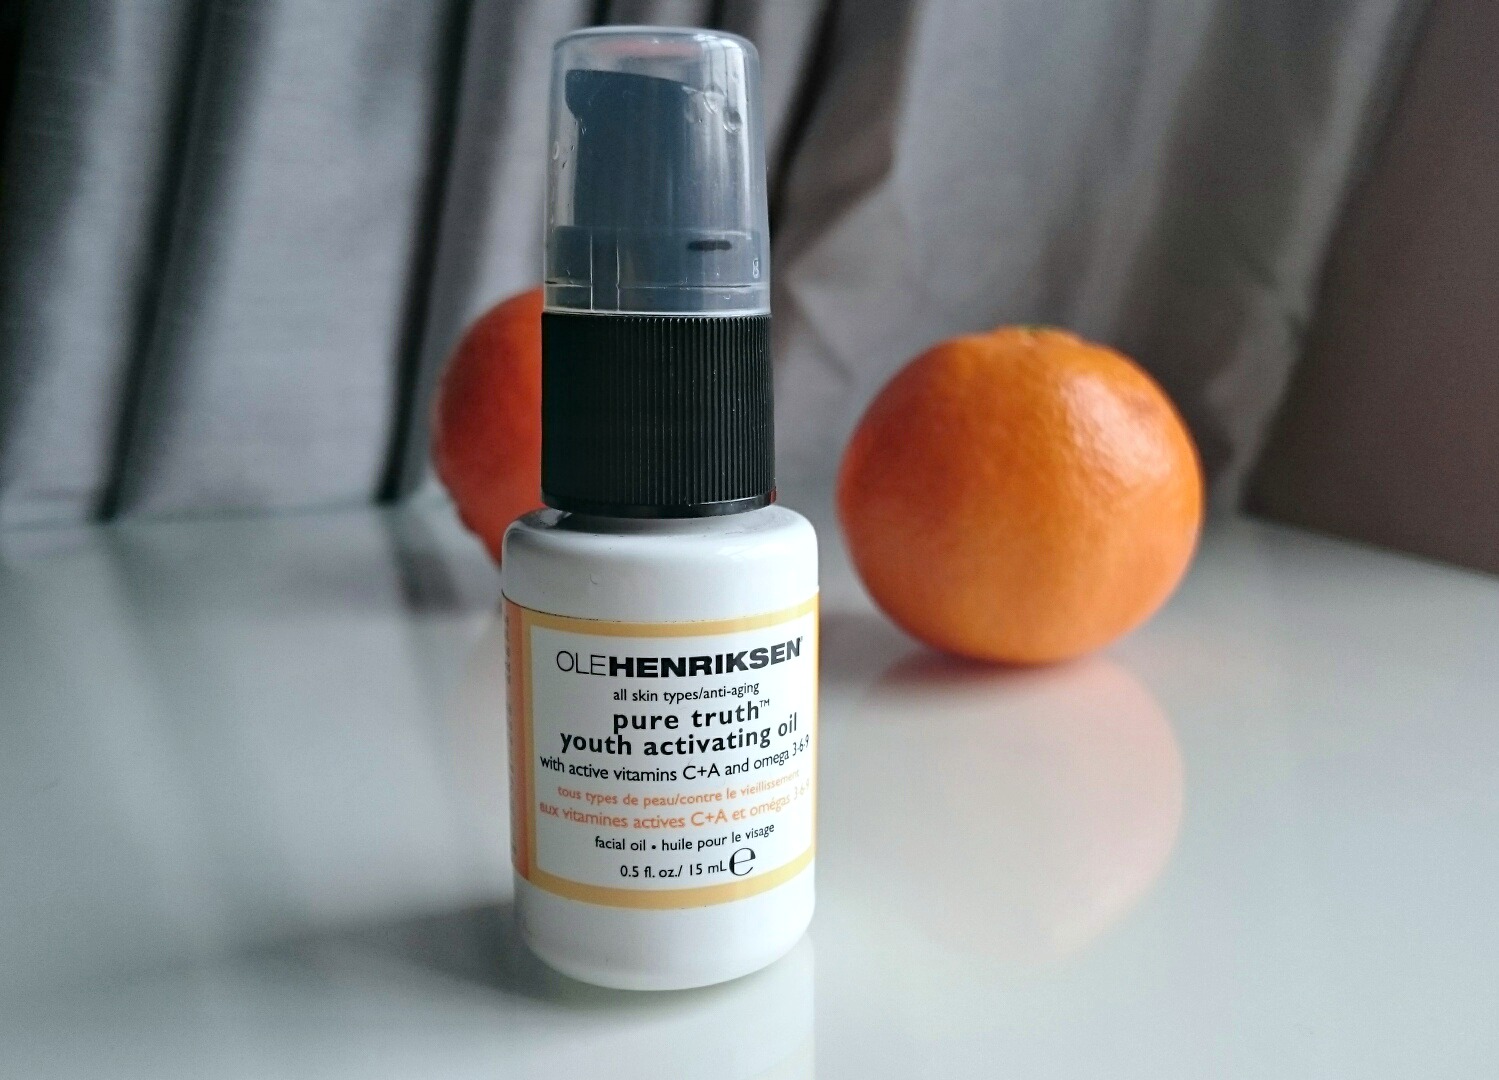 Ole henriksen Pure Truth Youth Activating Oil